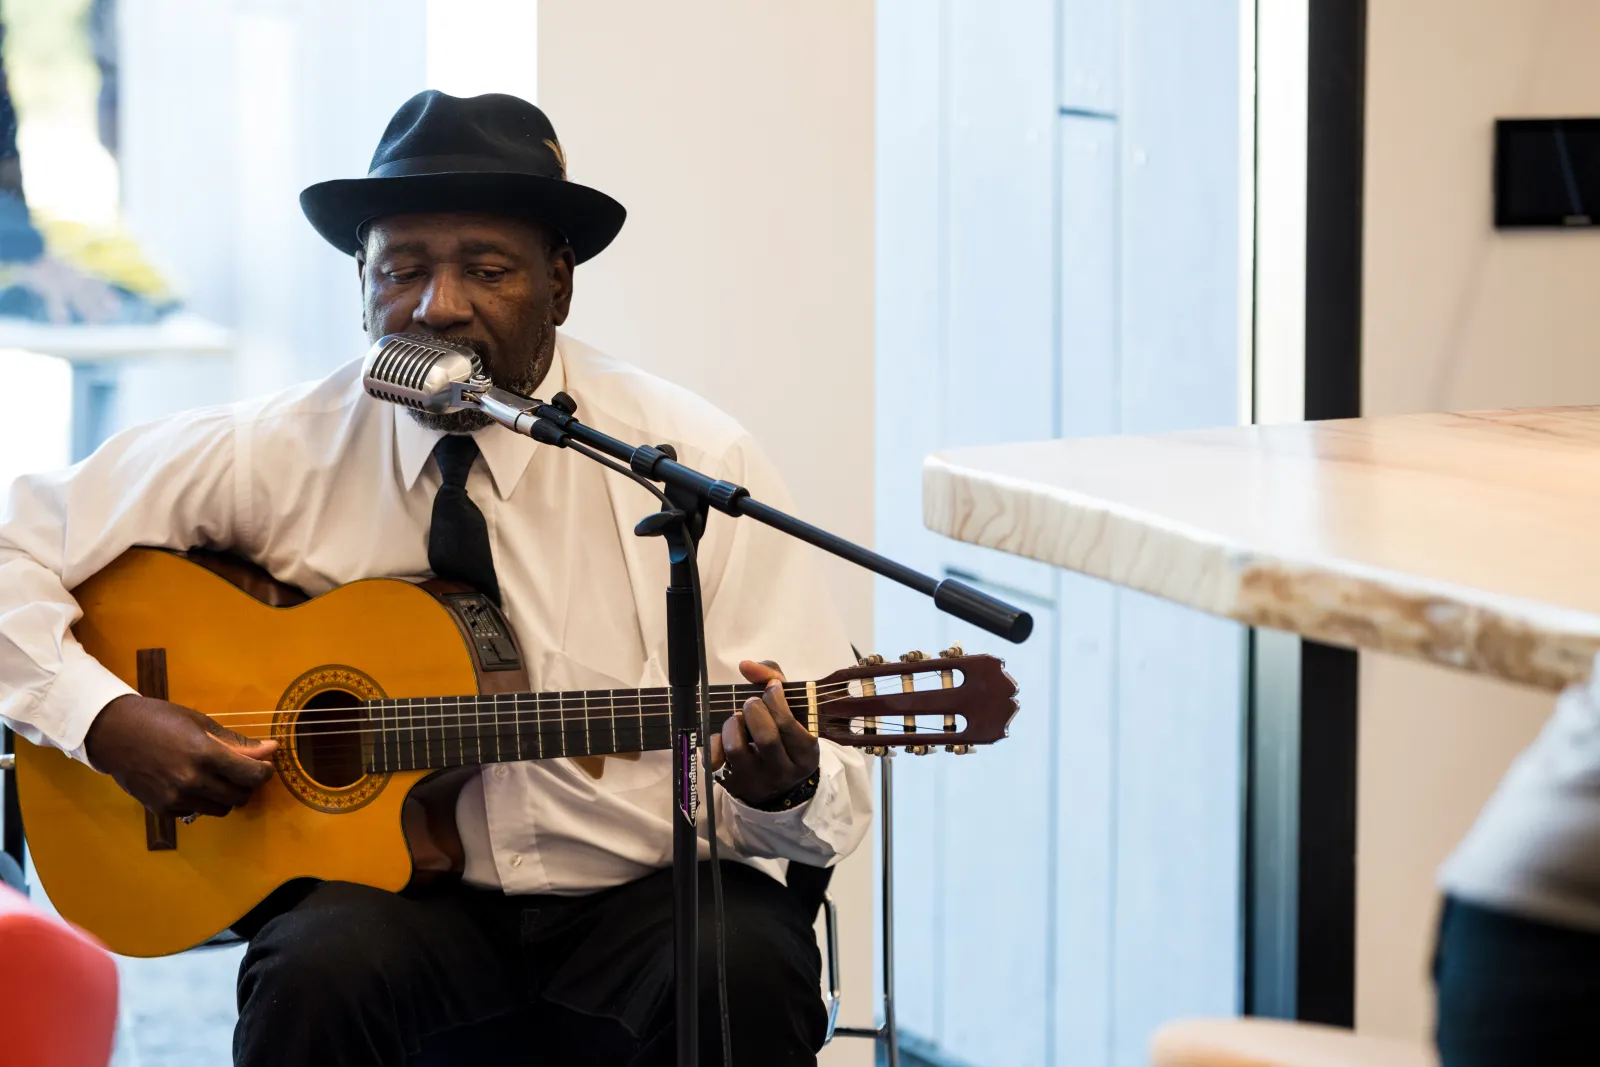 Richland Library Artist-in-Residence The Dubber performs at St. Andrews